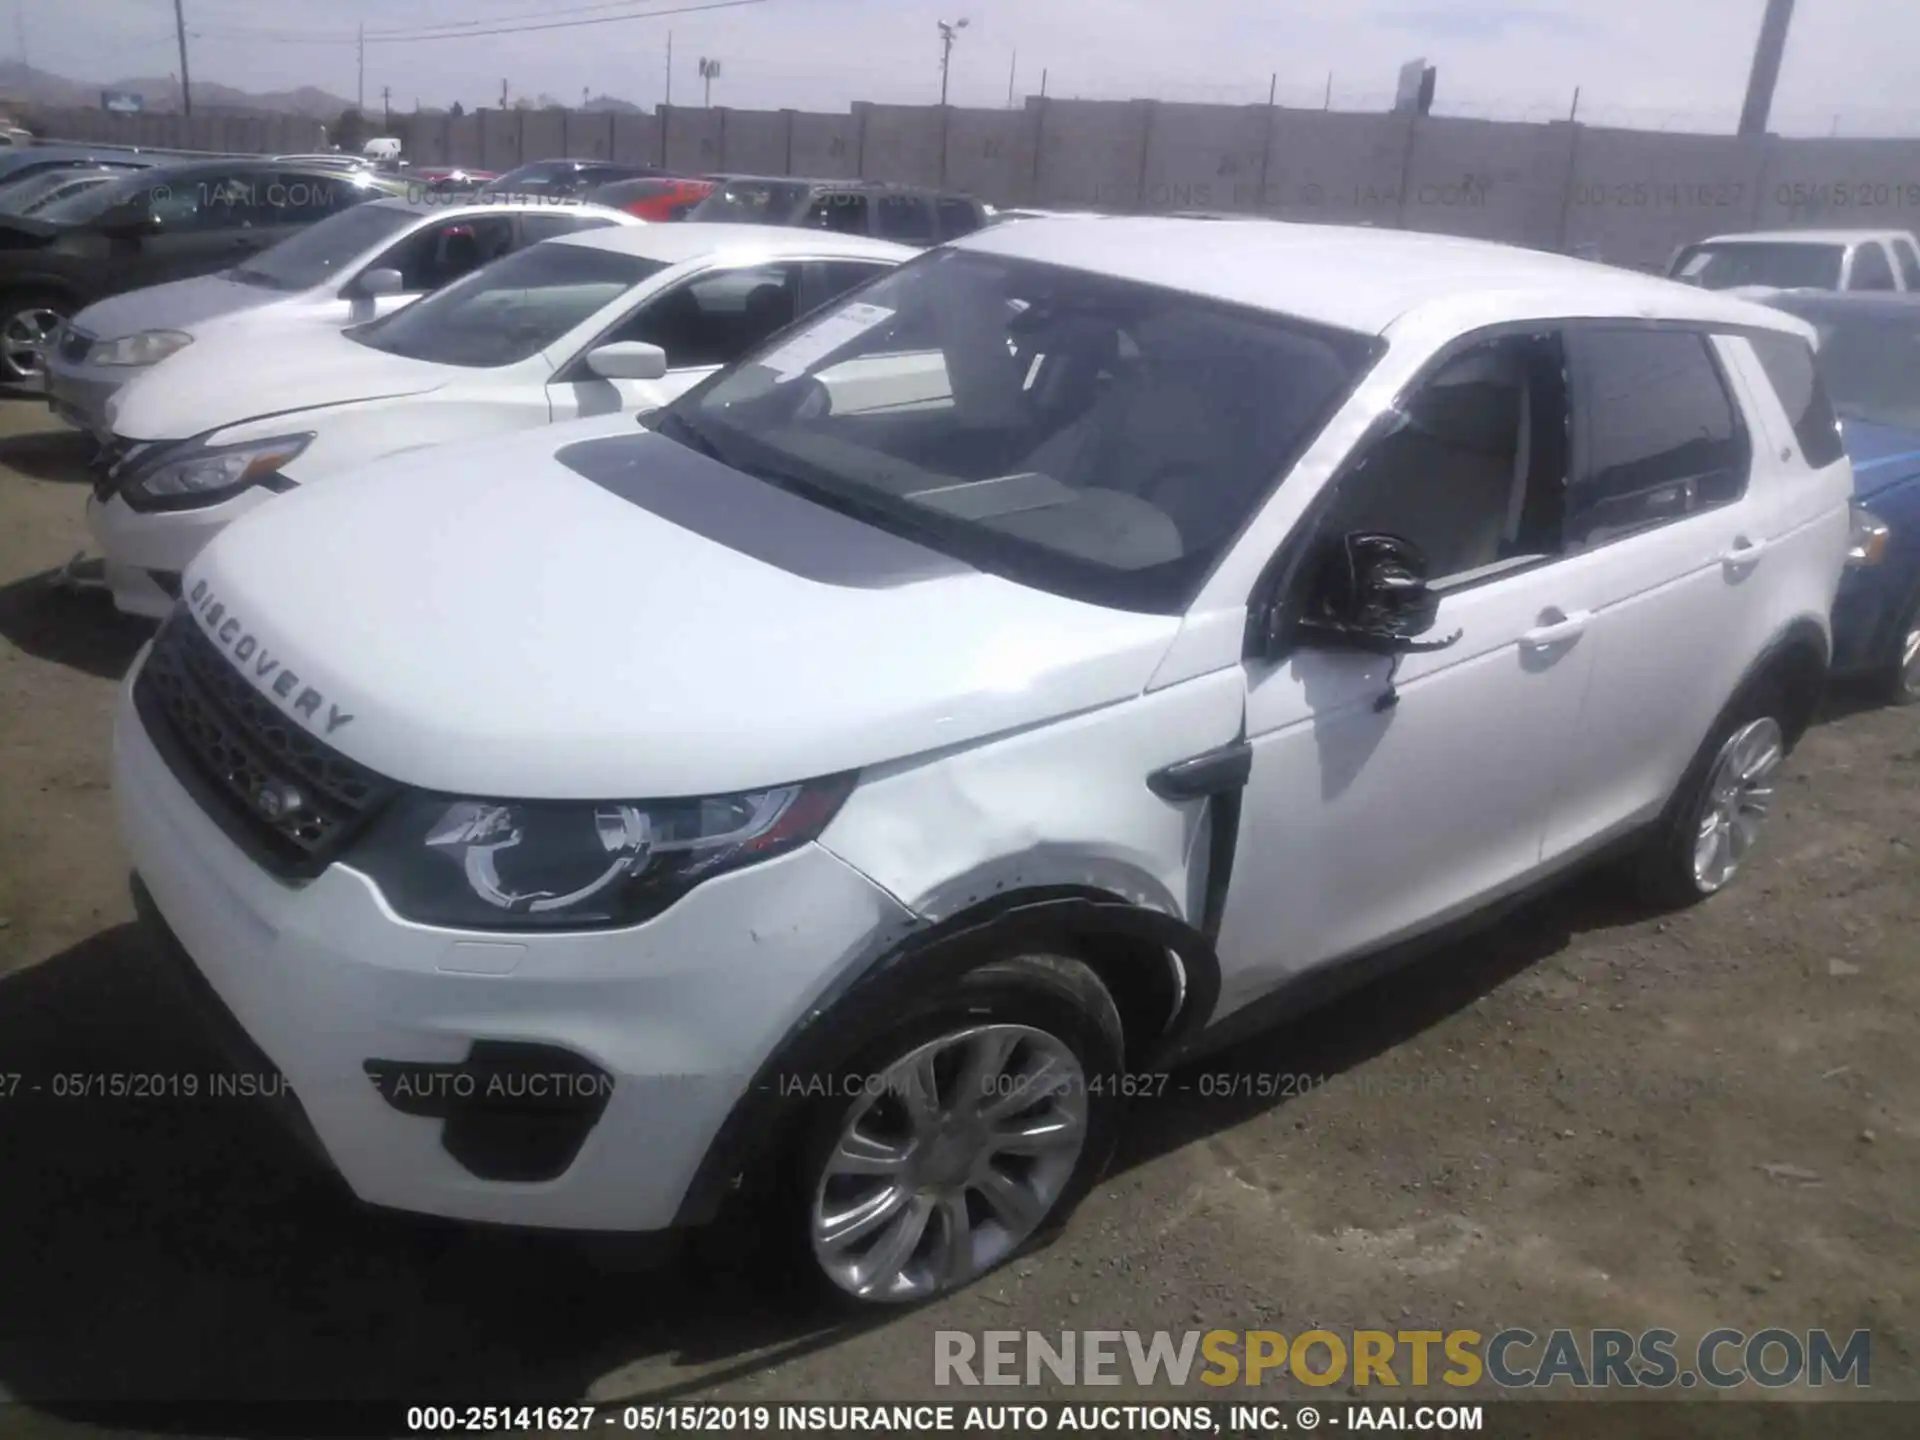 2 Photograph of a damaged car SALCP2FXXKH799937 LAND ROVER DISCOVERY SPORT 2019